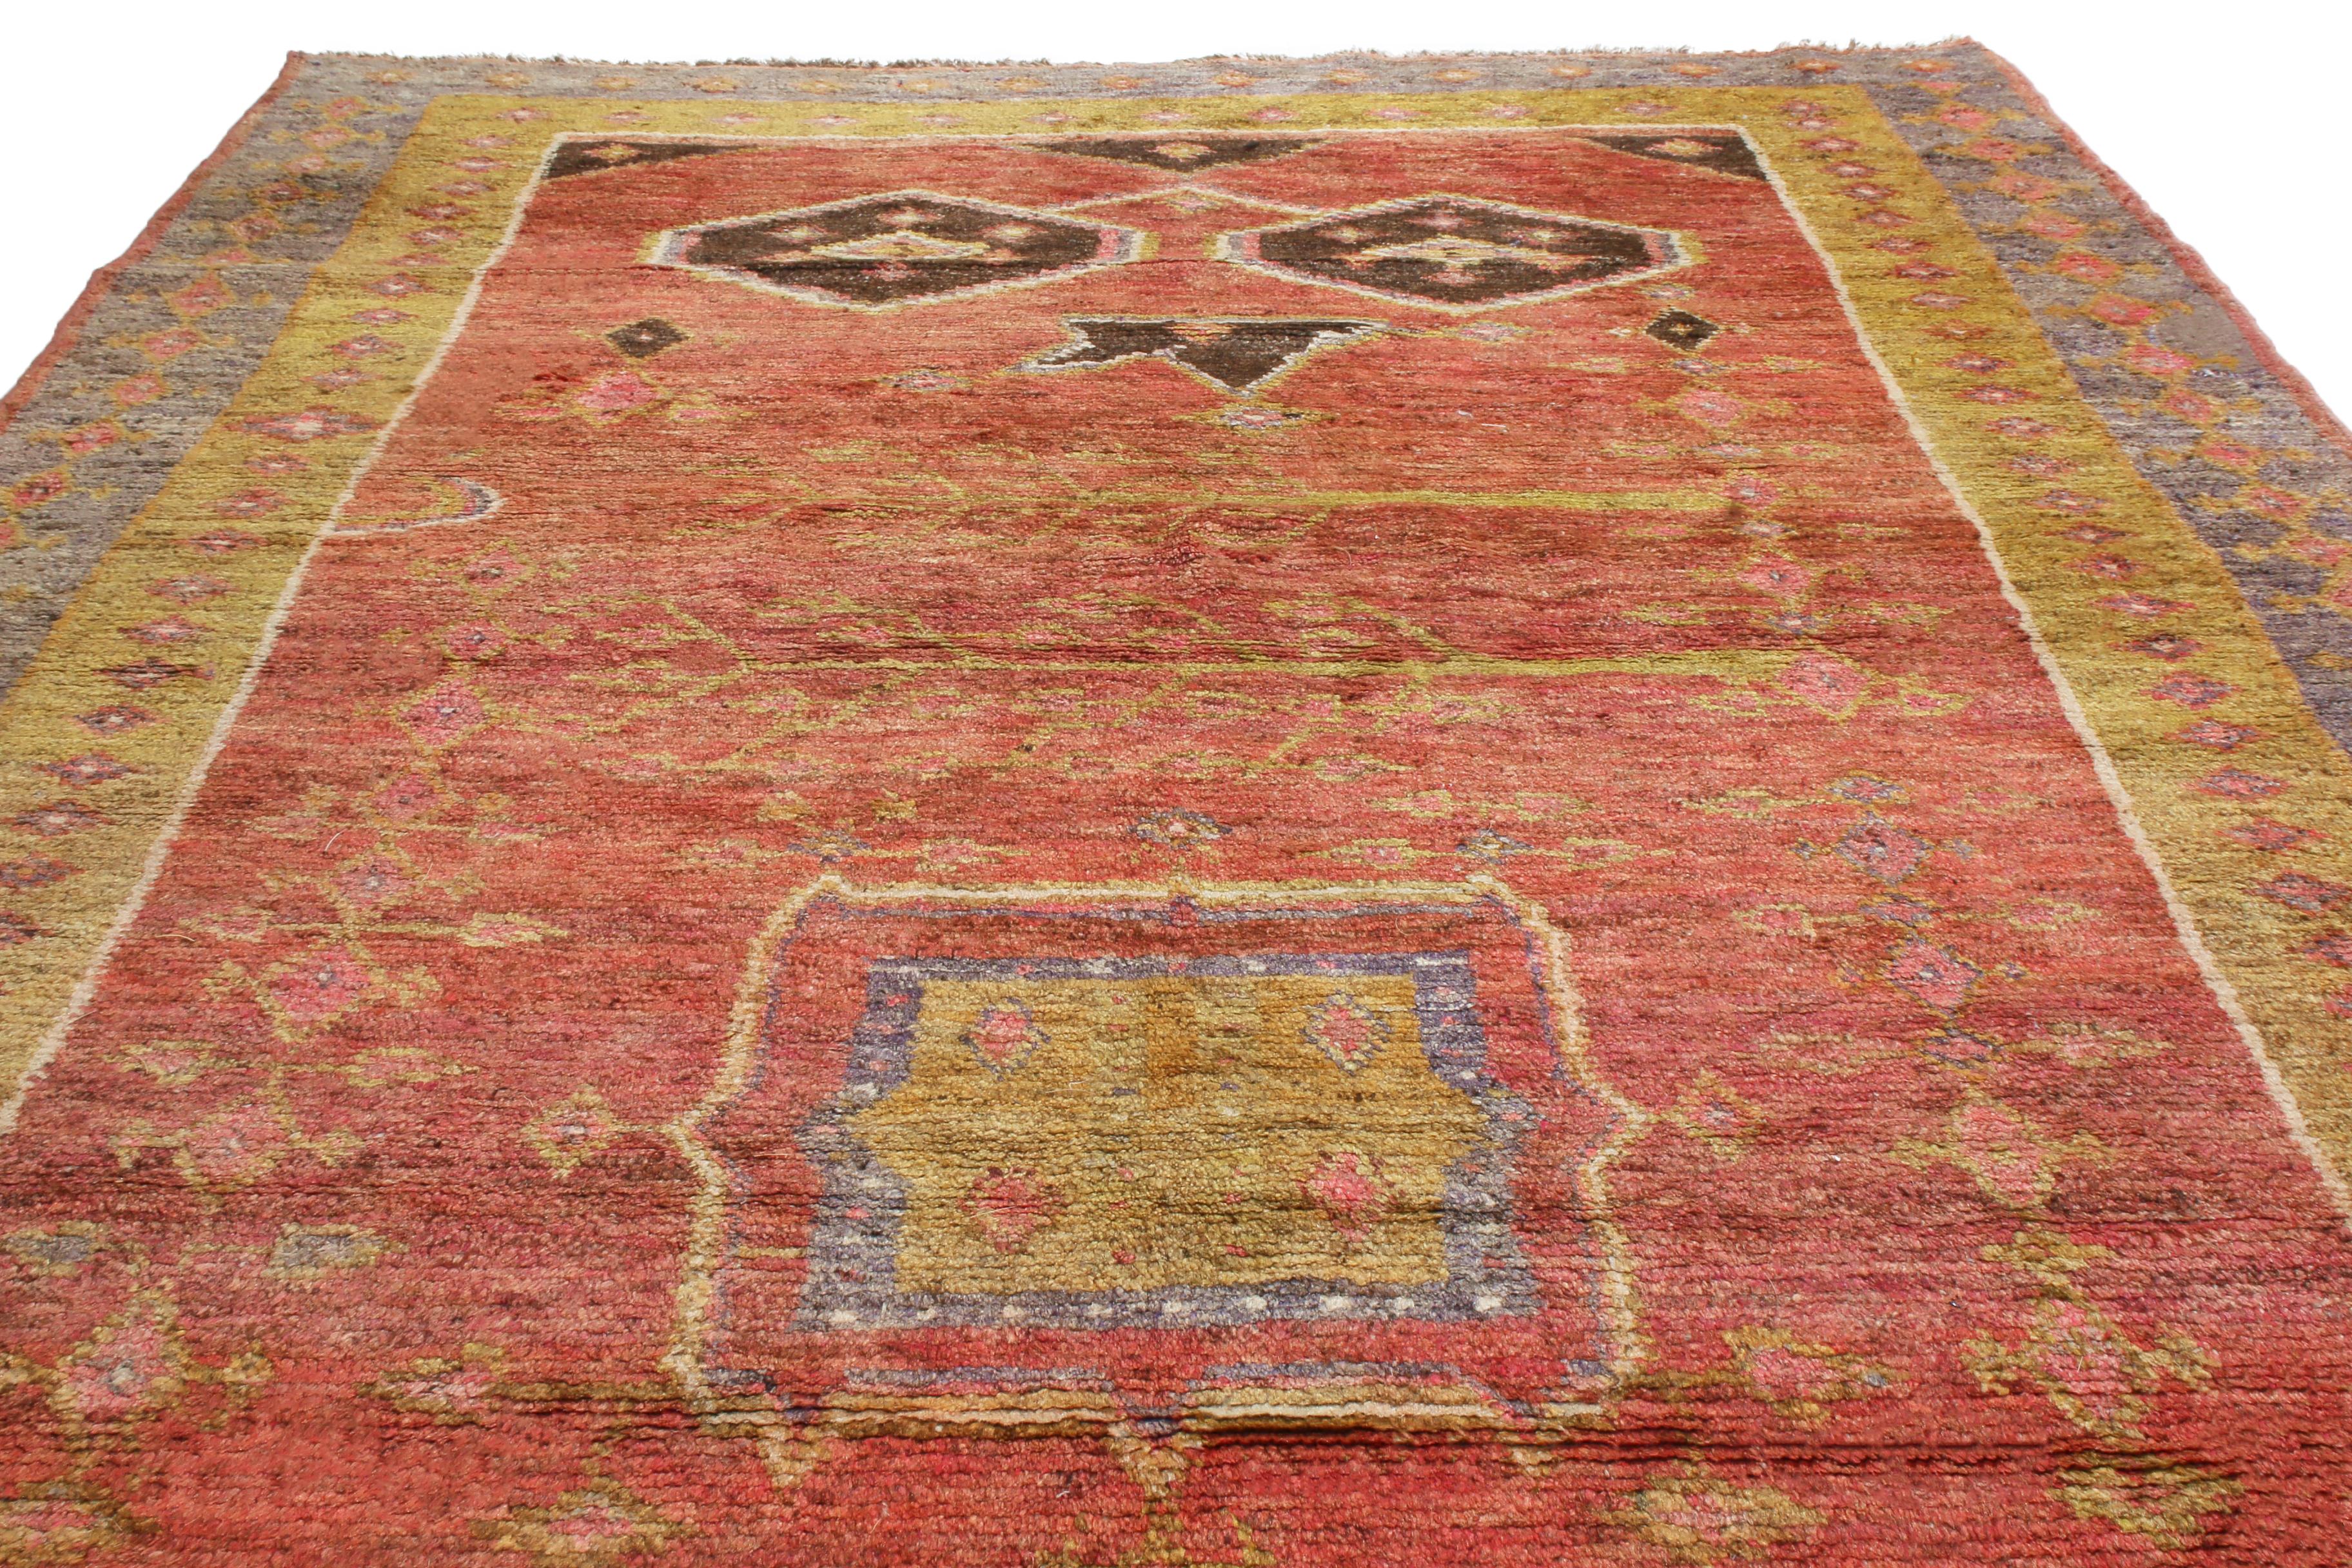 Originating from East Turkestan between 1880-1900, this antique traditional Khotan wool rug stands apart from a great number of pieces from its era, typically favoring runners over these more spacious area pieces. Hand knotted in durable wool pile,